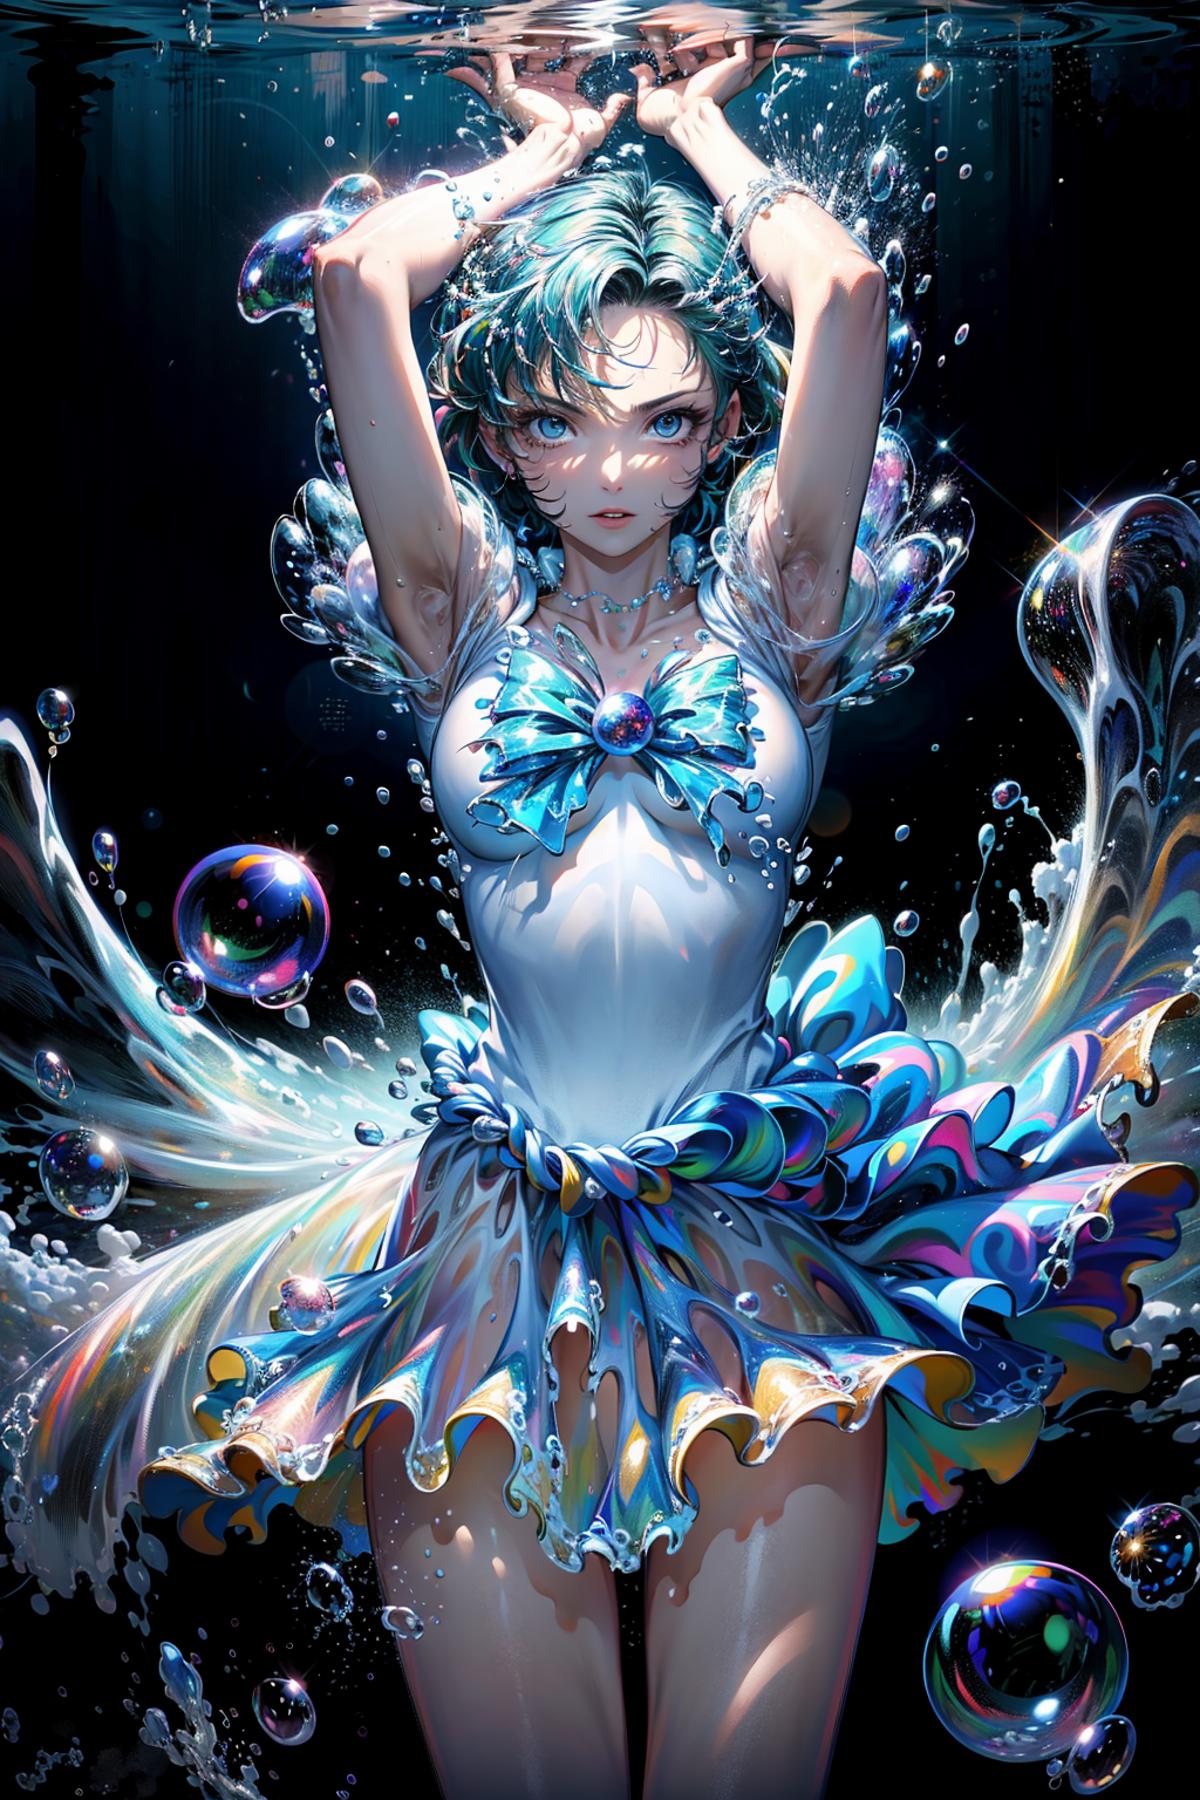 A Splashing Mermaid Image with Blue Waves, Bubbles, and a Bow.